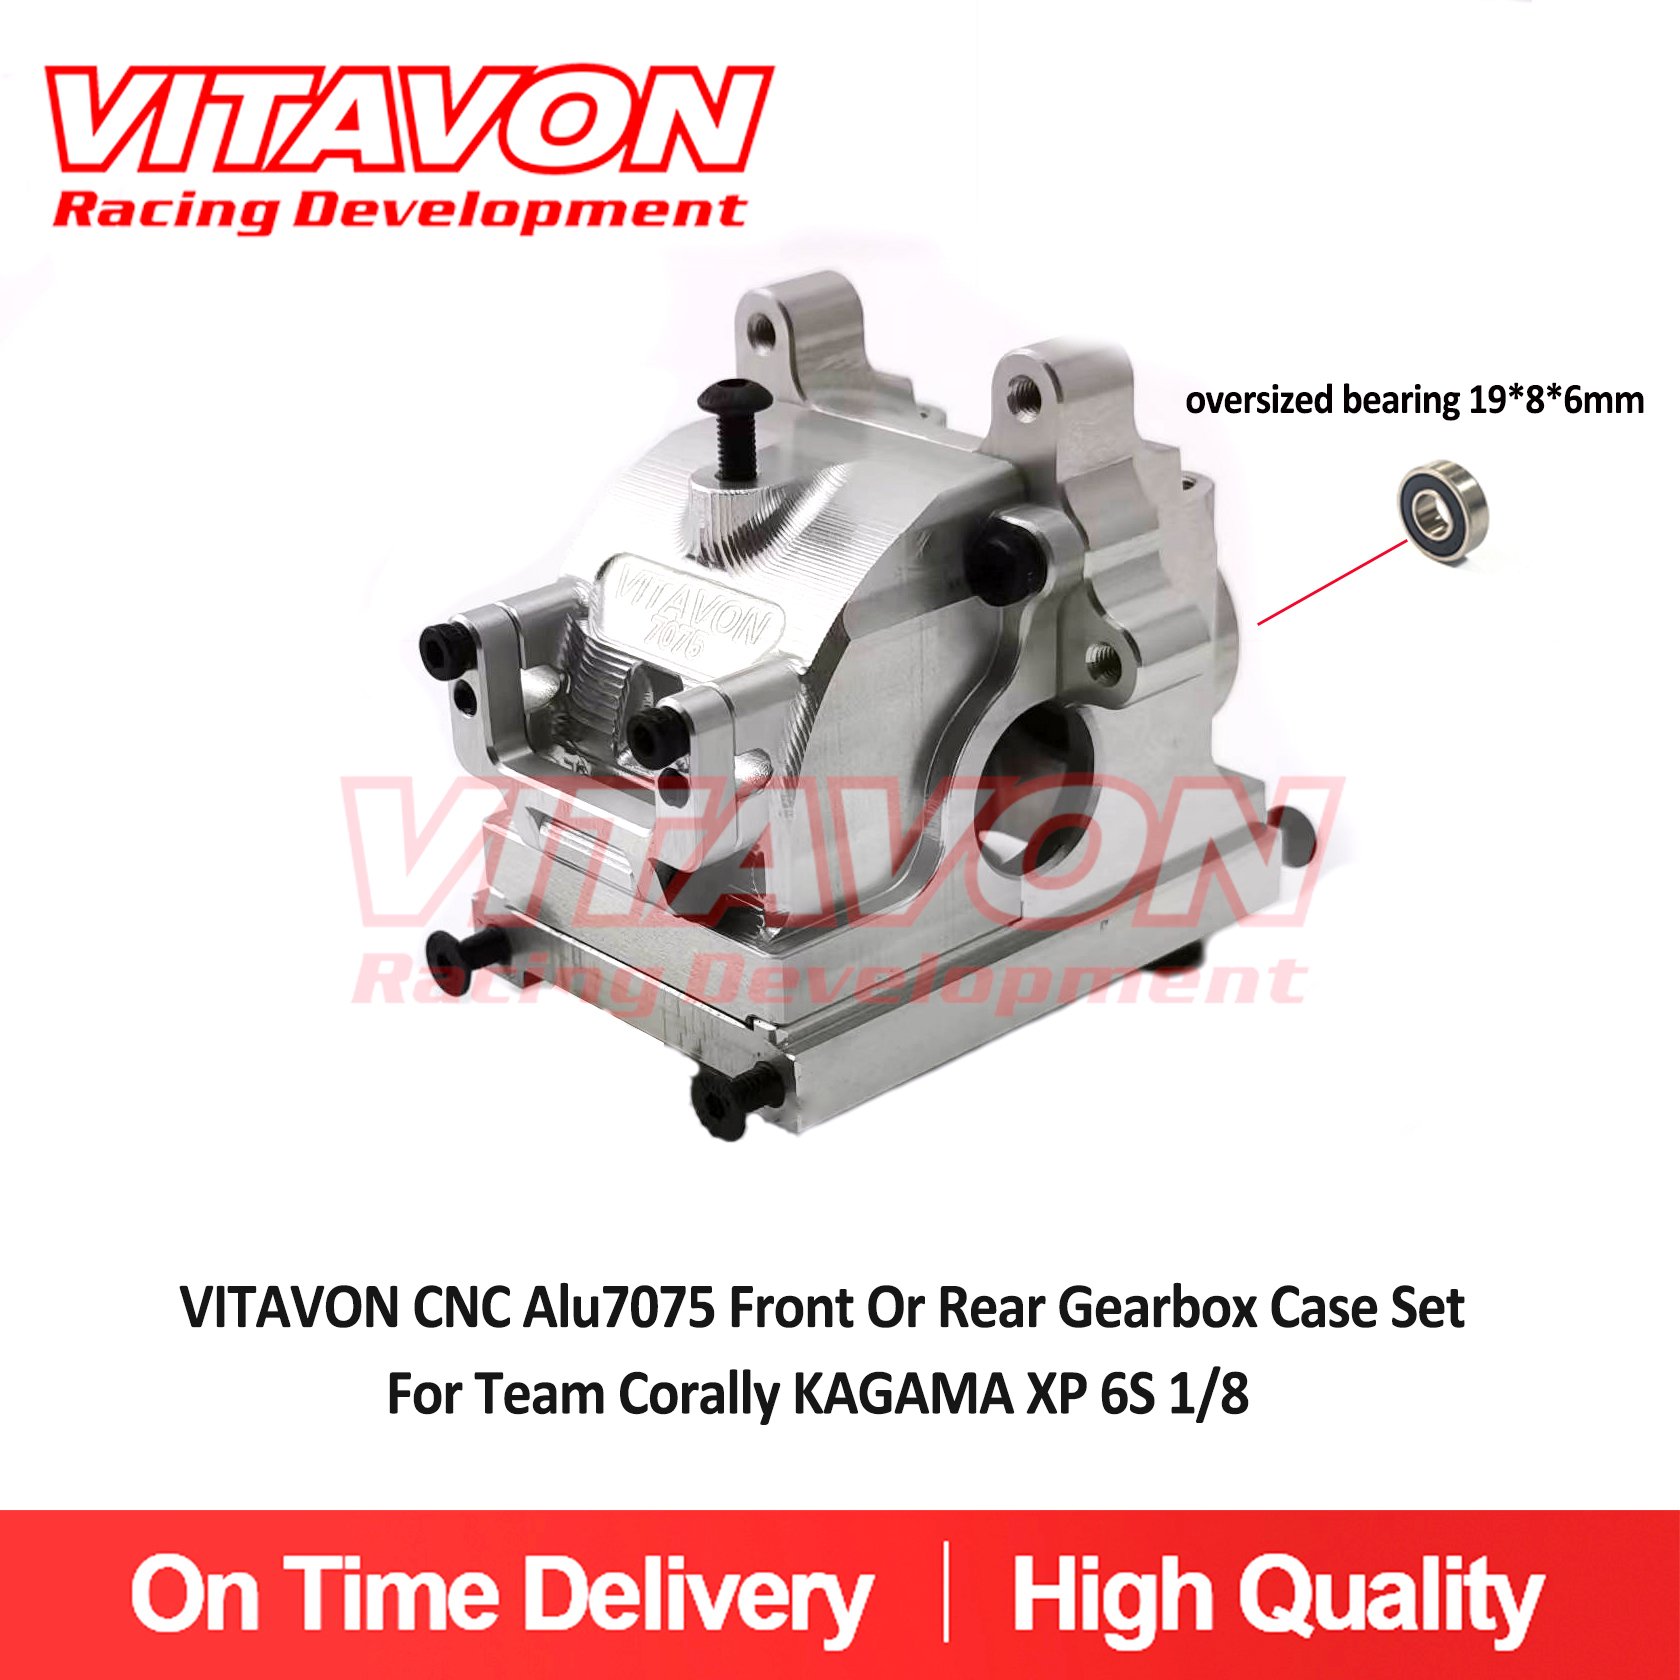 VITAVON CNC Alu7075 Front Or Rear Gearbox Case Set For Team Corally KAGAMA XP 6S 1/8